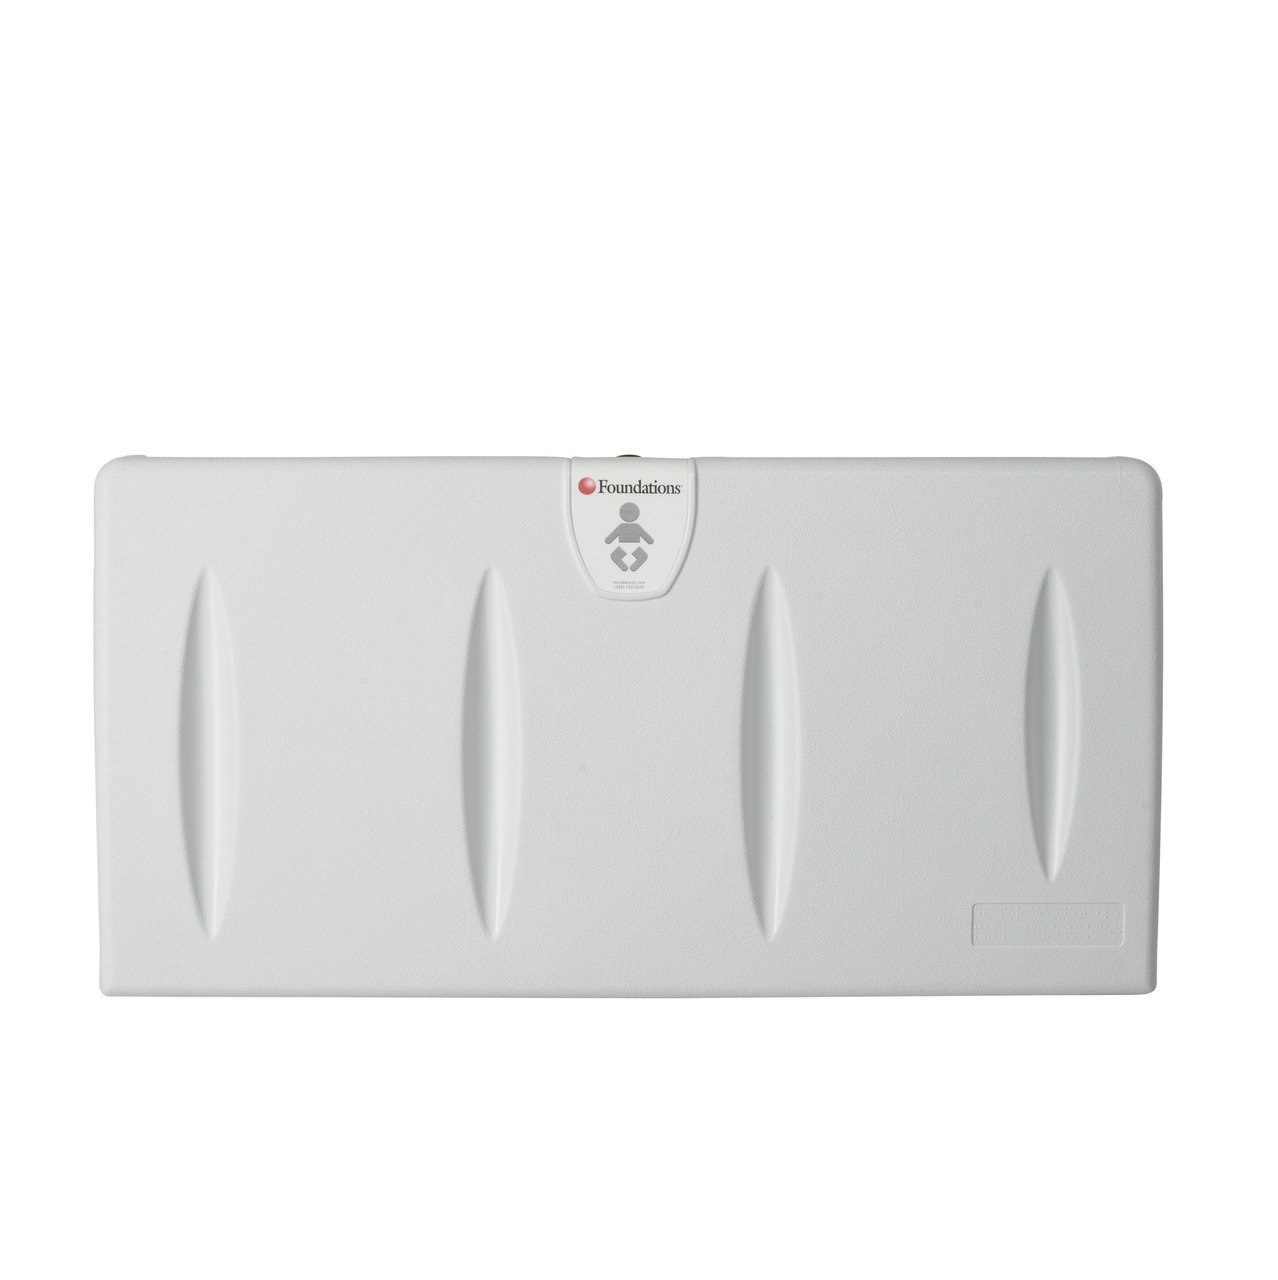 Foundation white plastic baby changing table